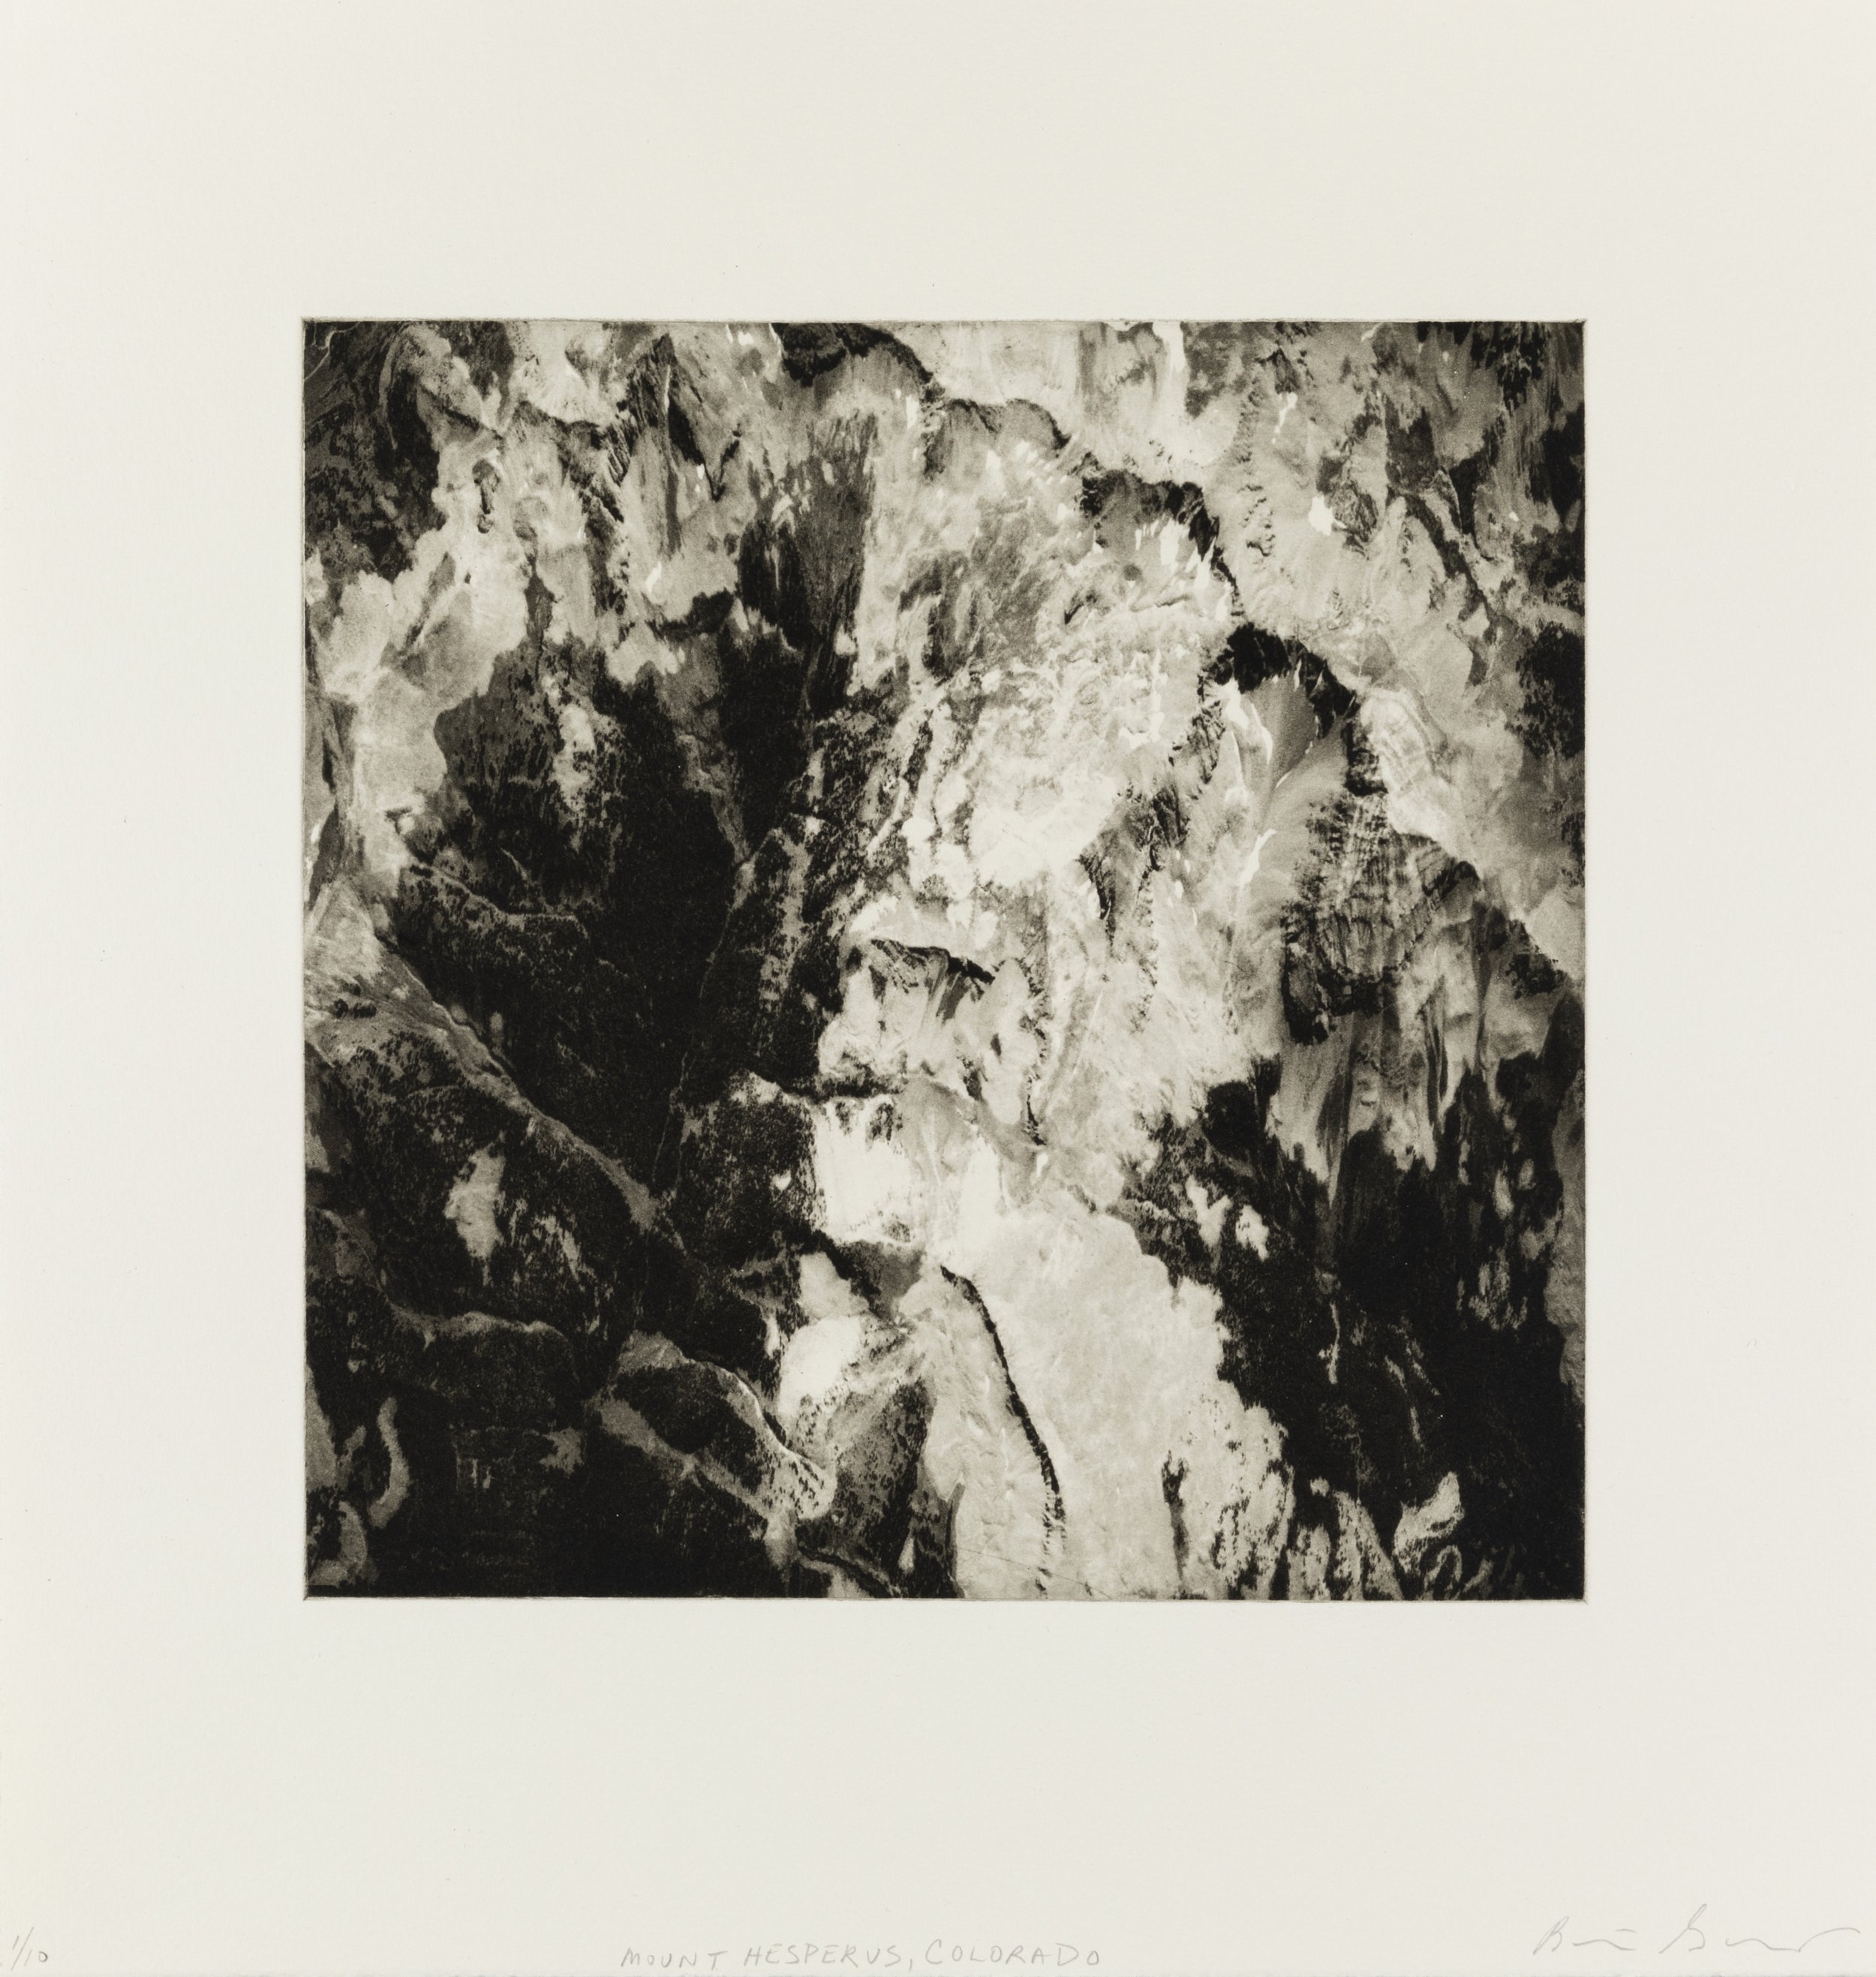    Mount Hesperus, Colorado, 2021   Copperplate photogravure etching on cotton rag paper, plate size; 10.6 x 10.6, paper size; 16 x 15.5, edition 10  